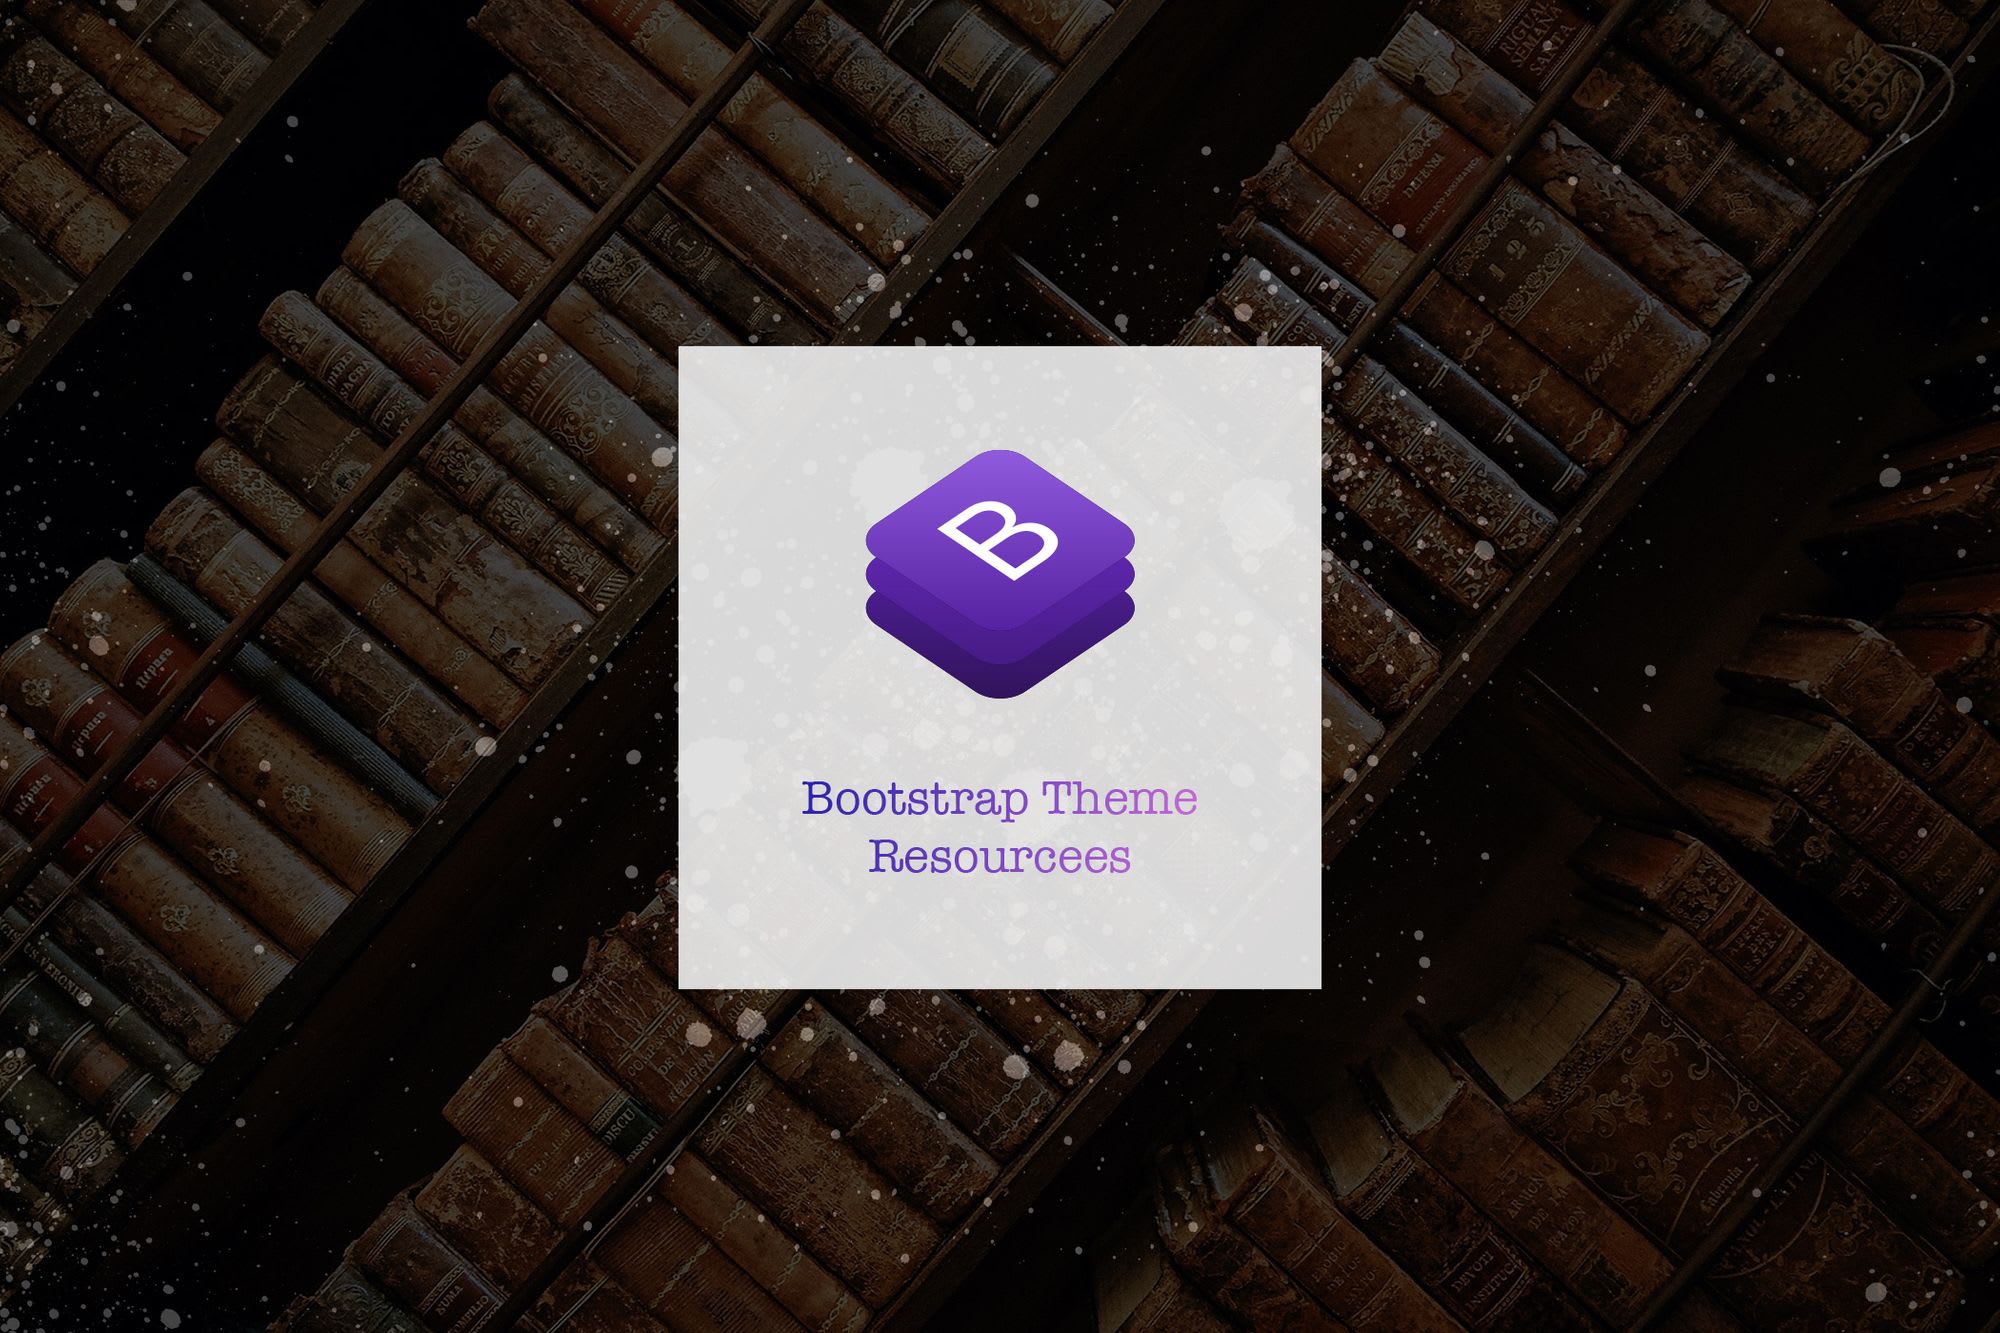 Bootstrap Theme Resources